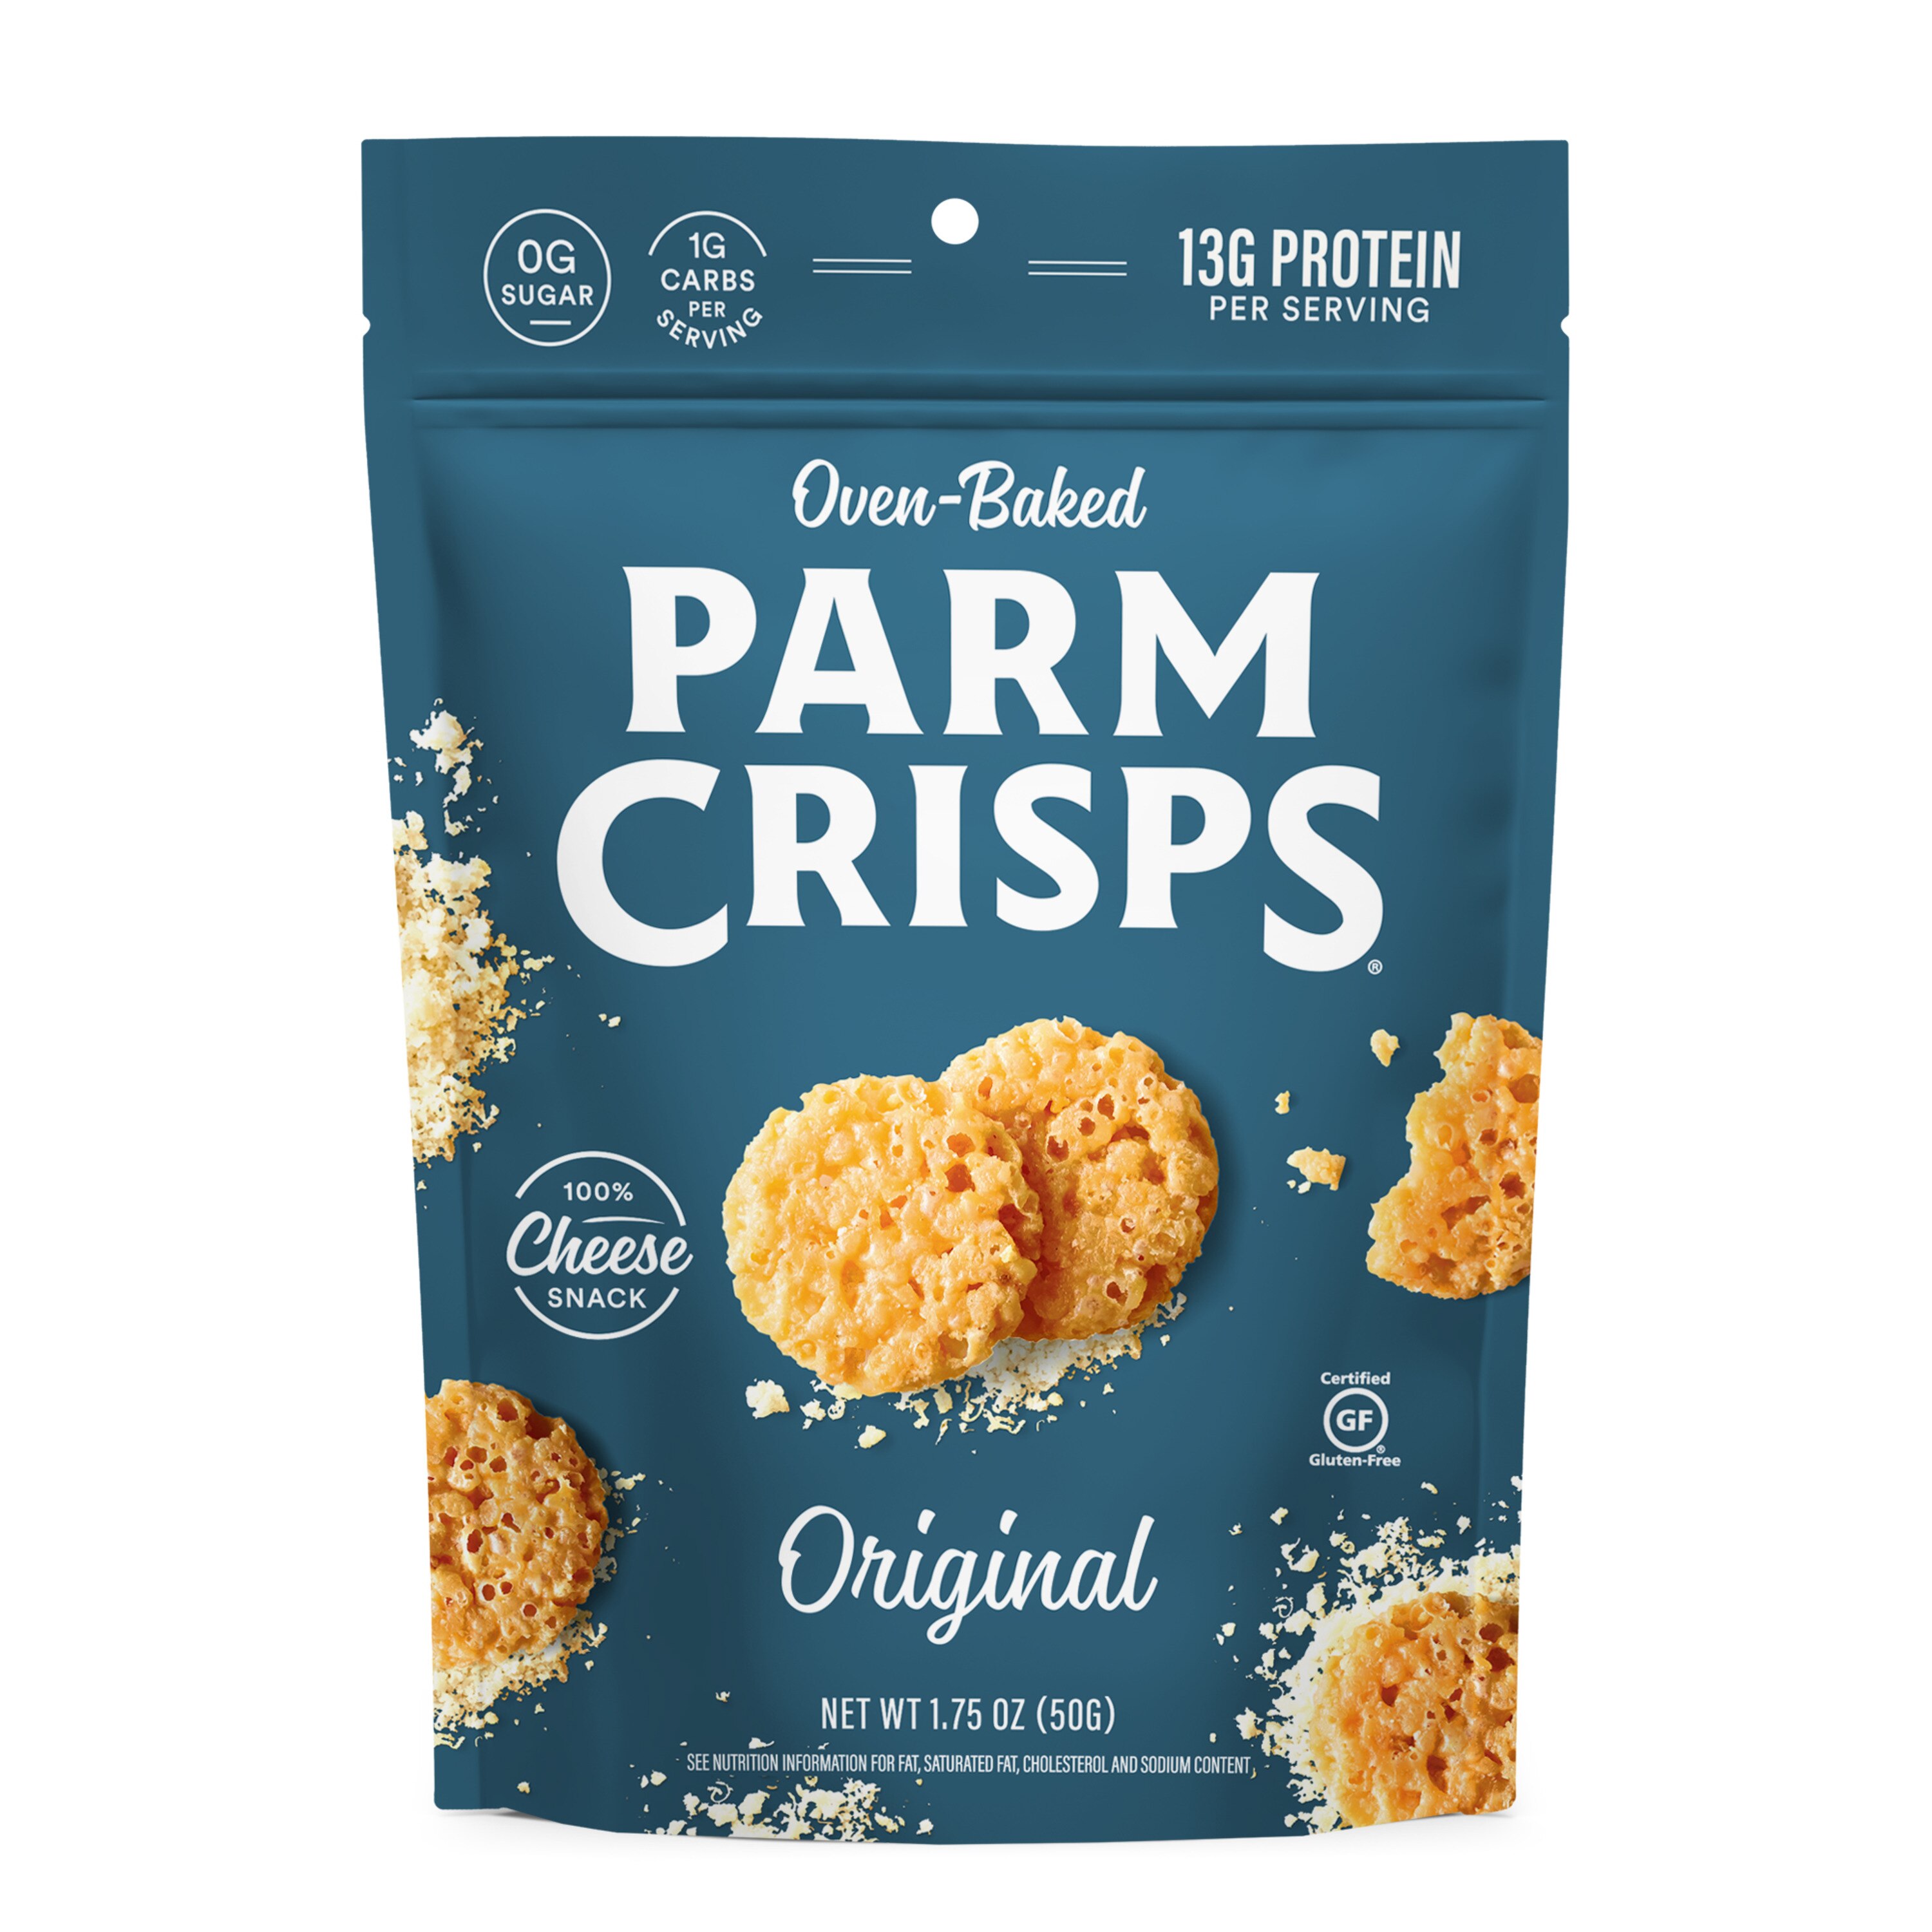 Parm Crisps Oven-Baked Original Cheese Snack, 1.75 OZ